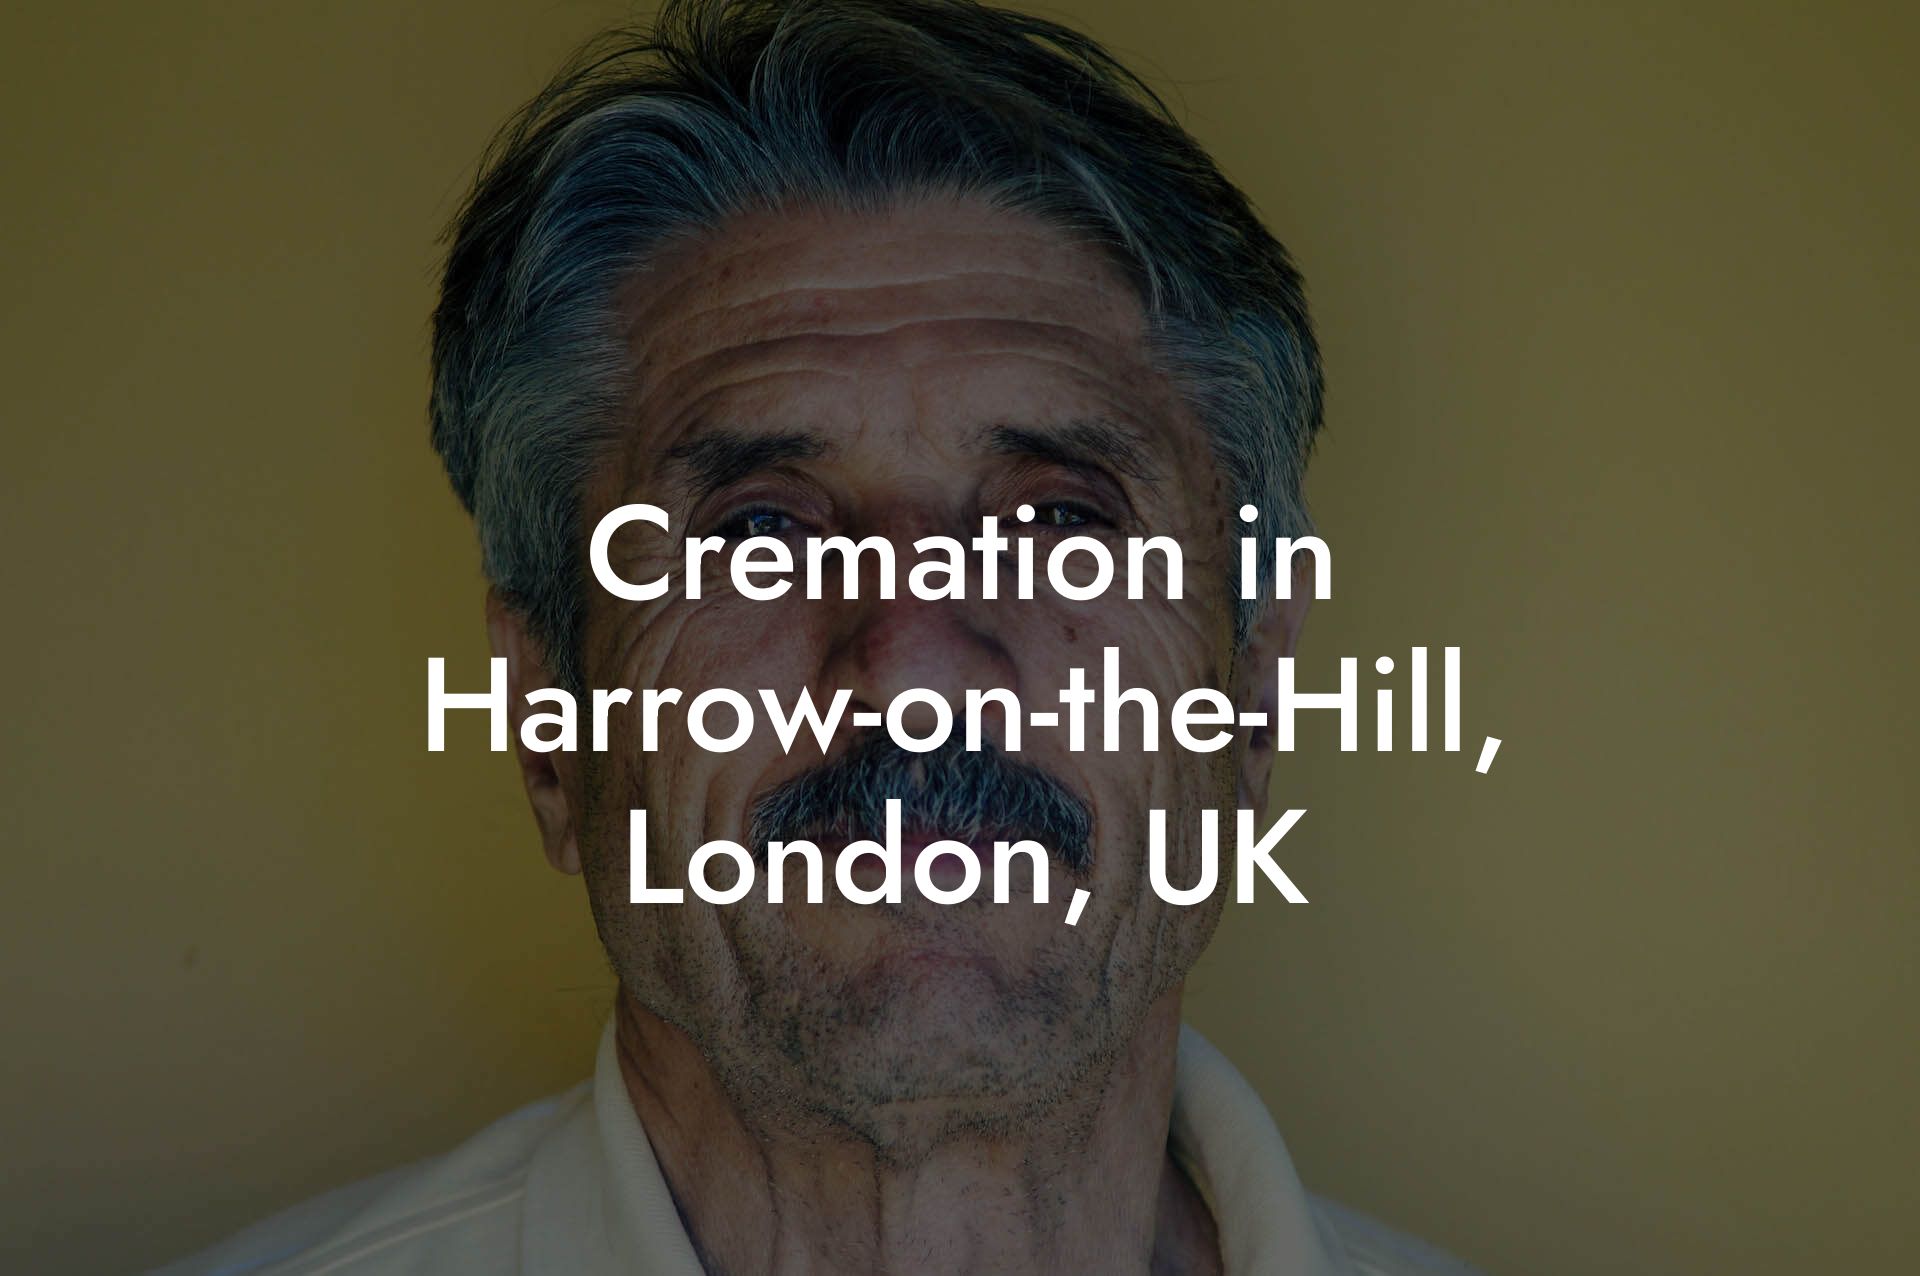 Cremation in Harrow-on-the-Hill, London, UK